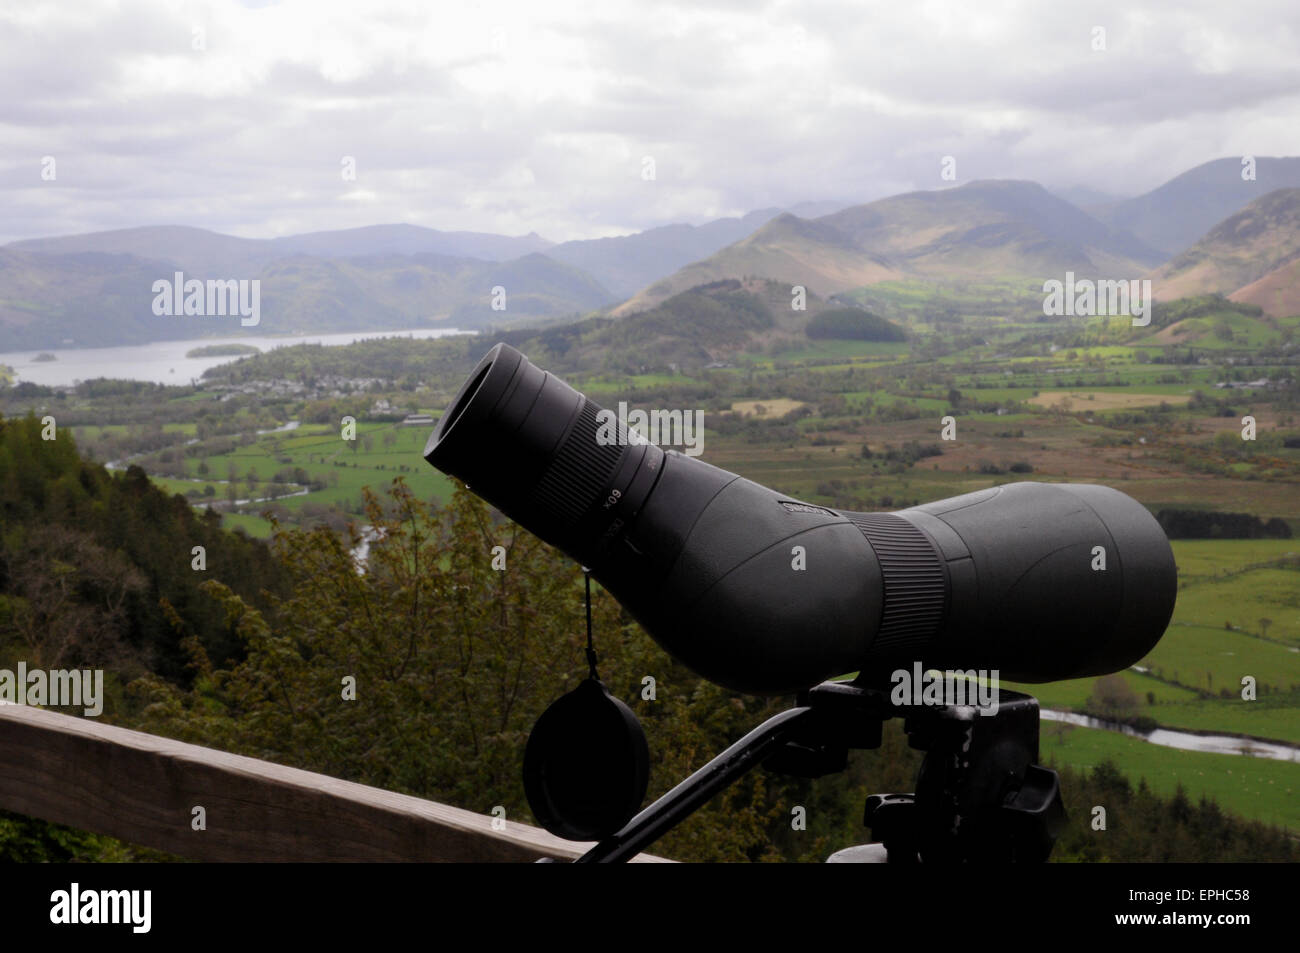 A powerful telescope at the "Ospreywatch" site at Dodd Wood, overlooking the River Derwent and Bassenthwaite. Stock Photo